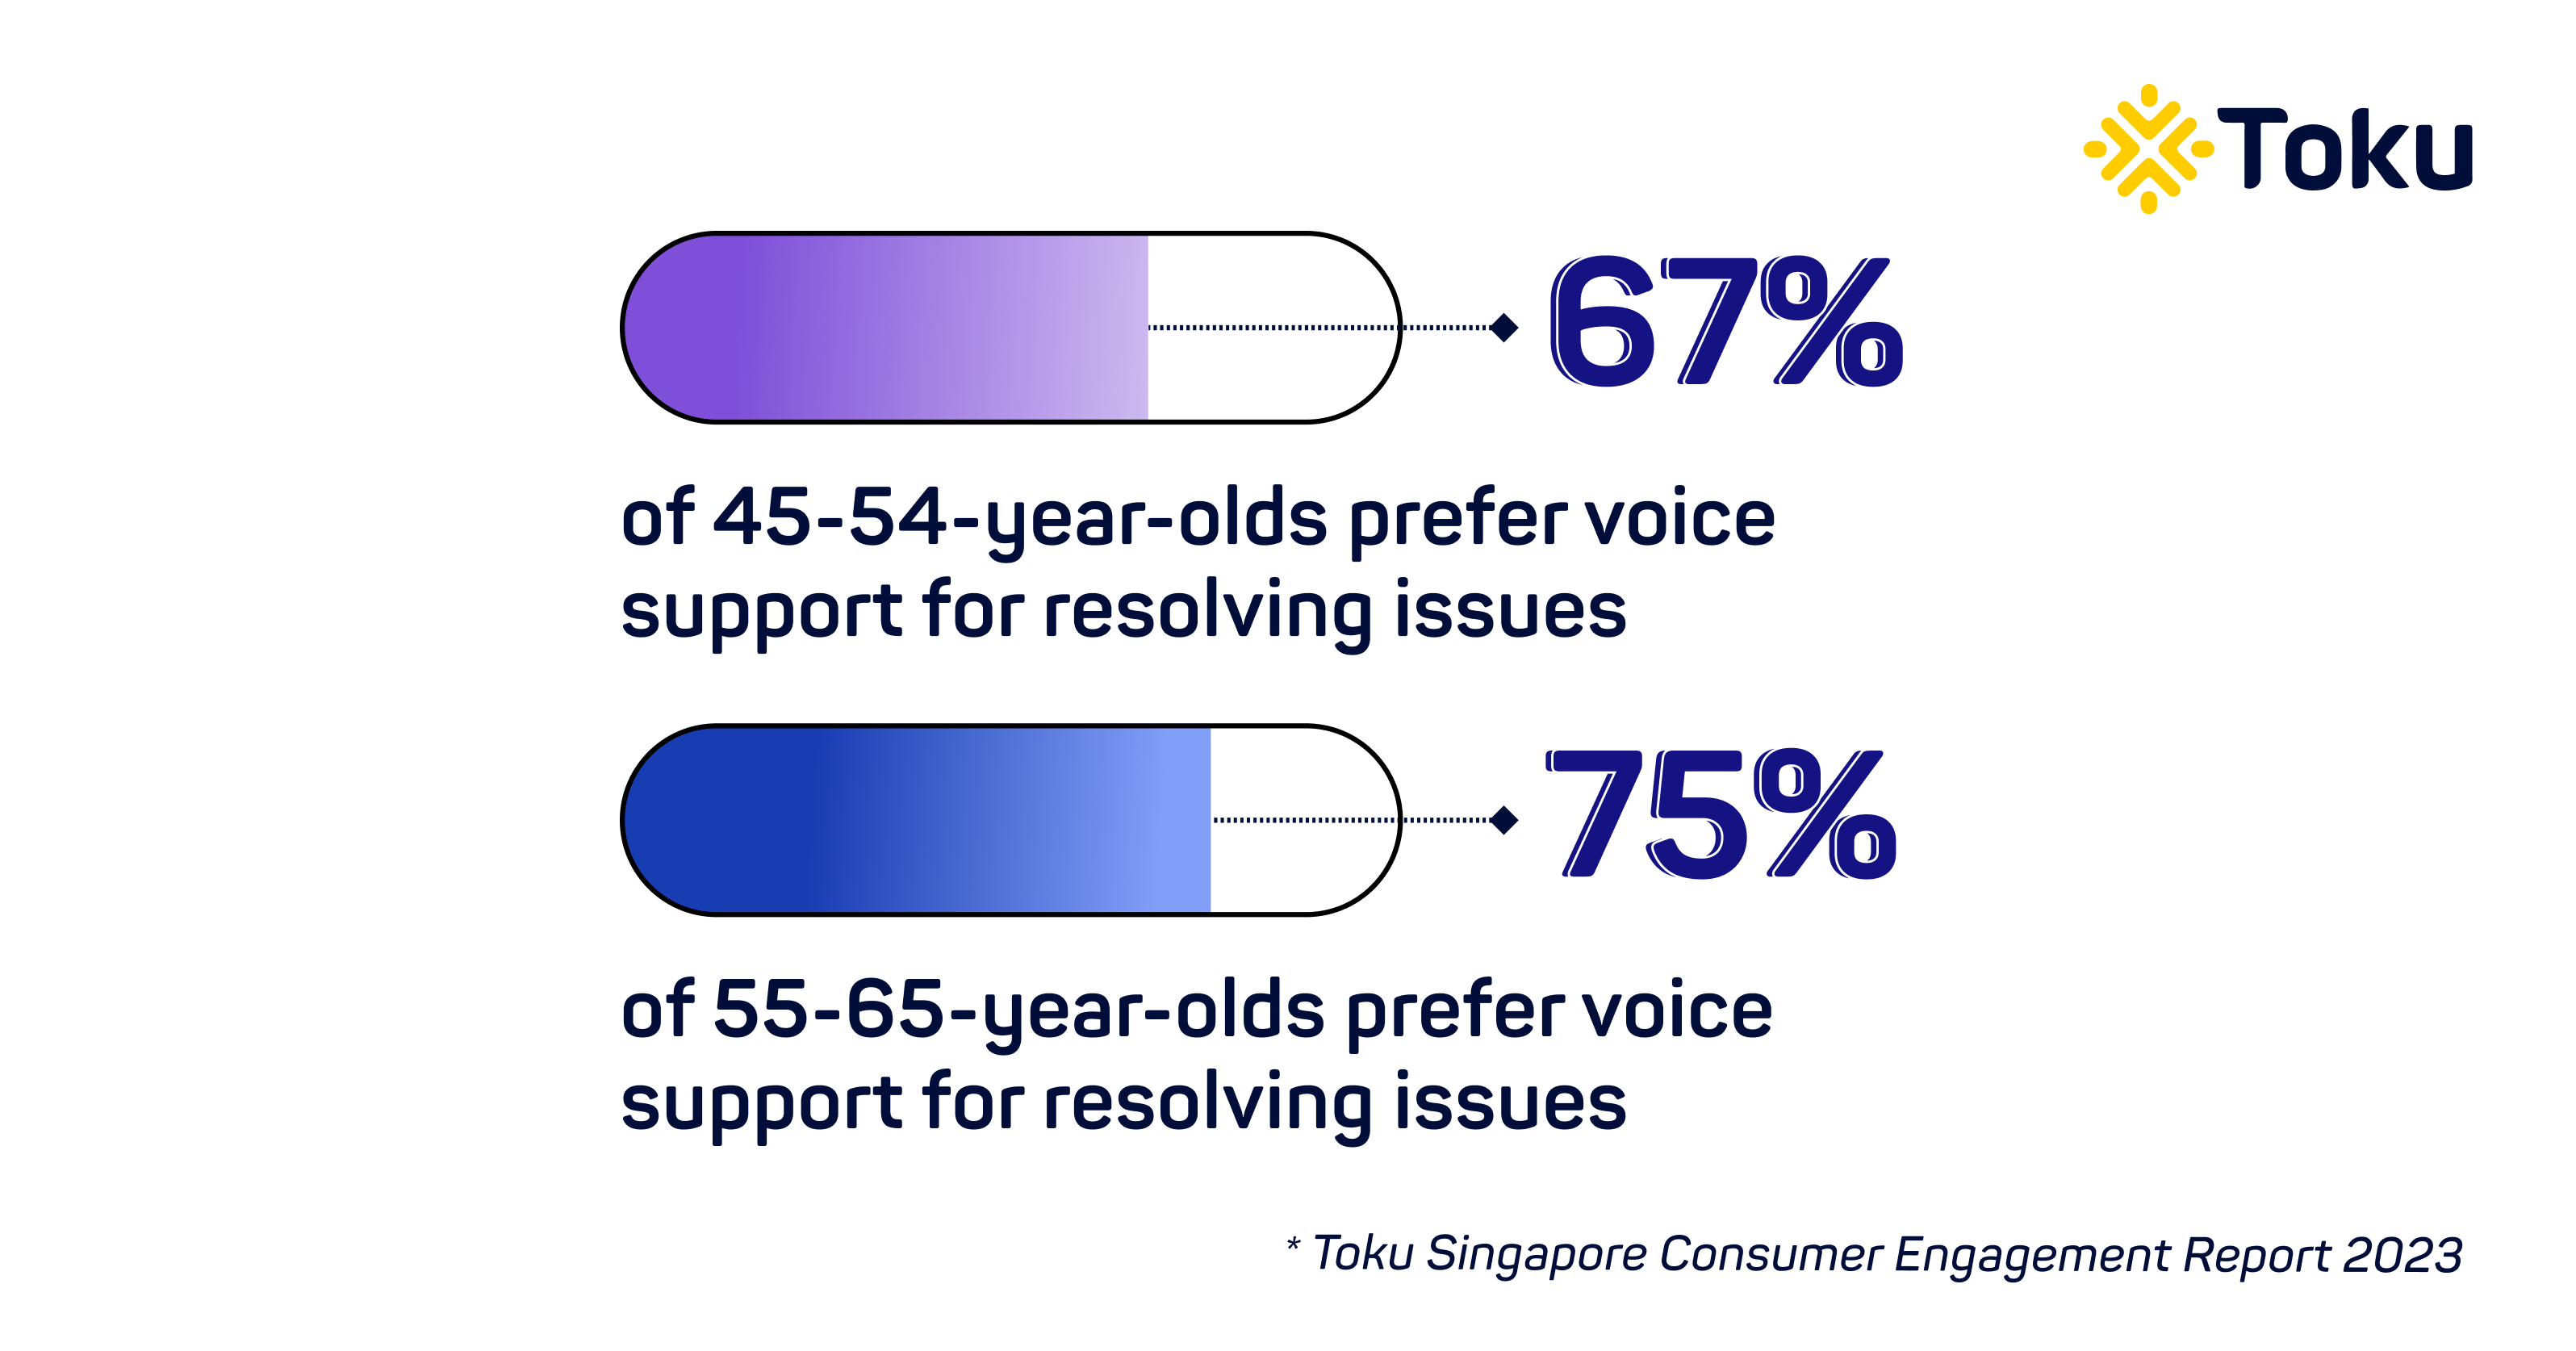 Preference for voice support for resolving issues by age groups